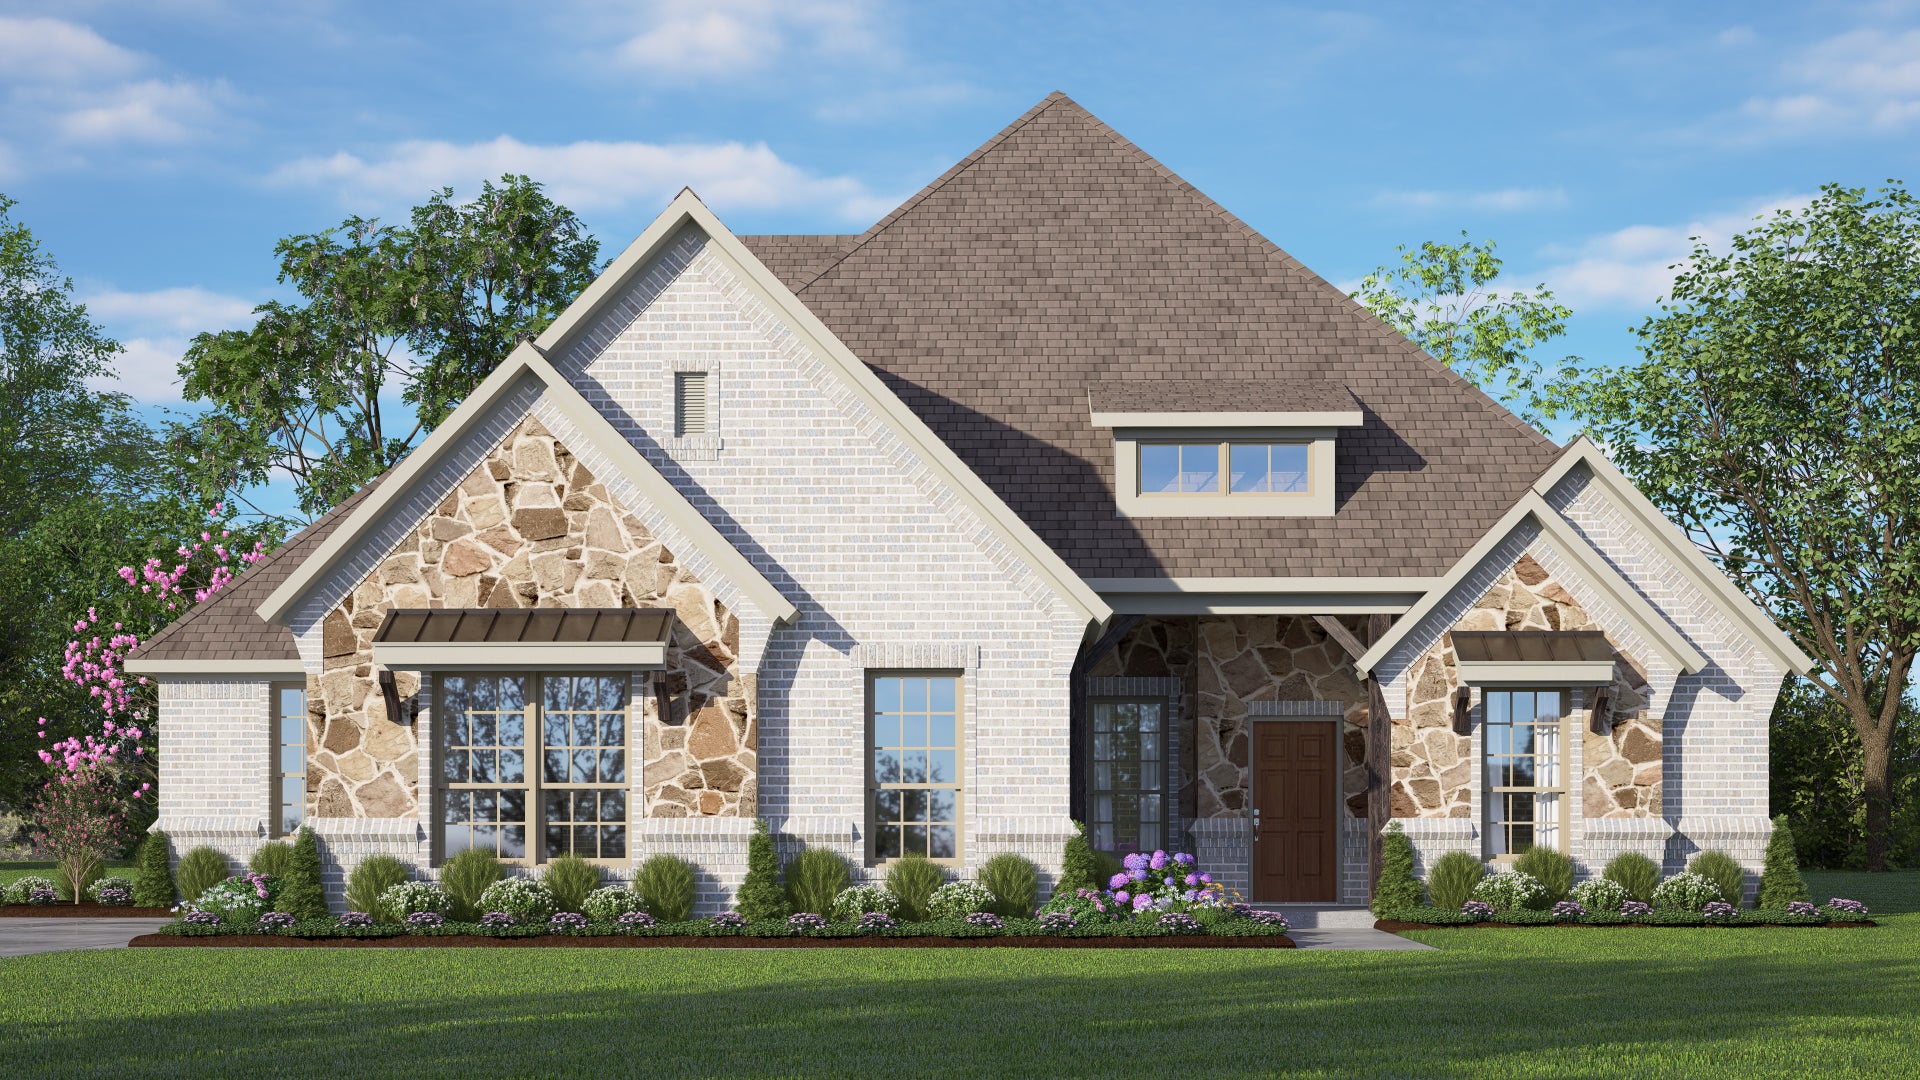 2555 C with Stone. 2,555sf New Home